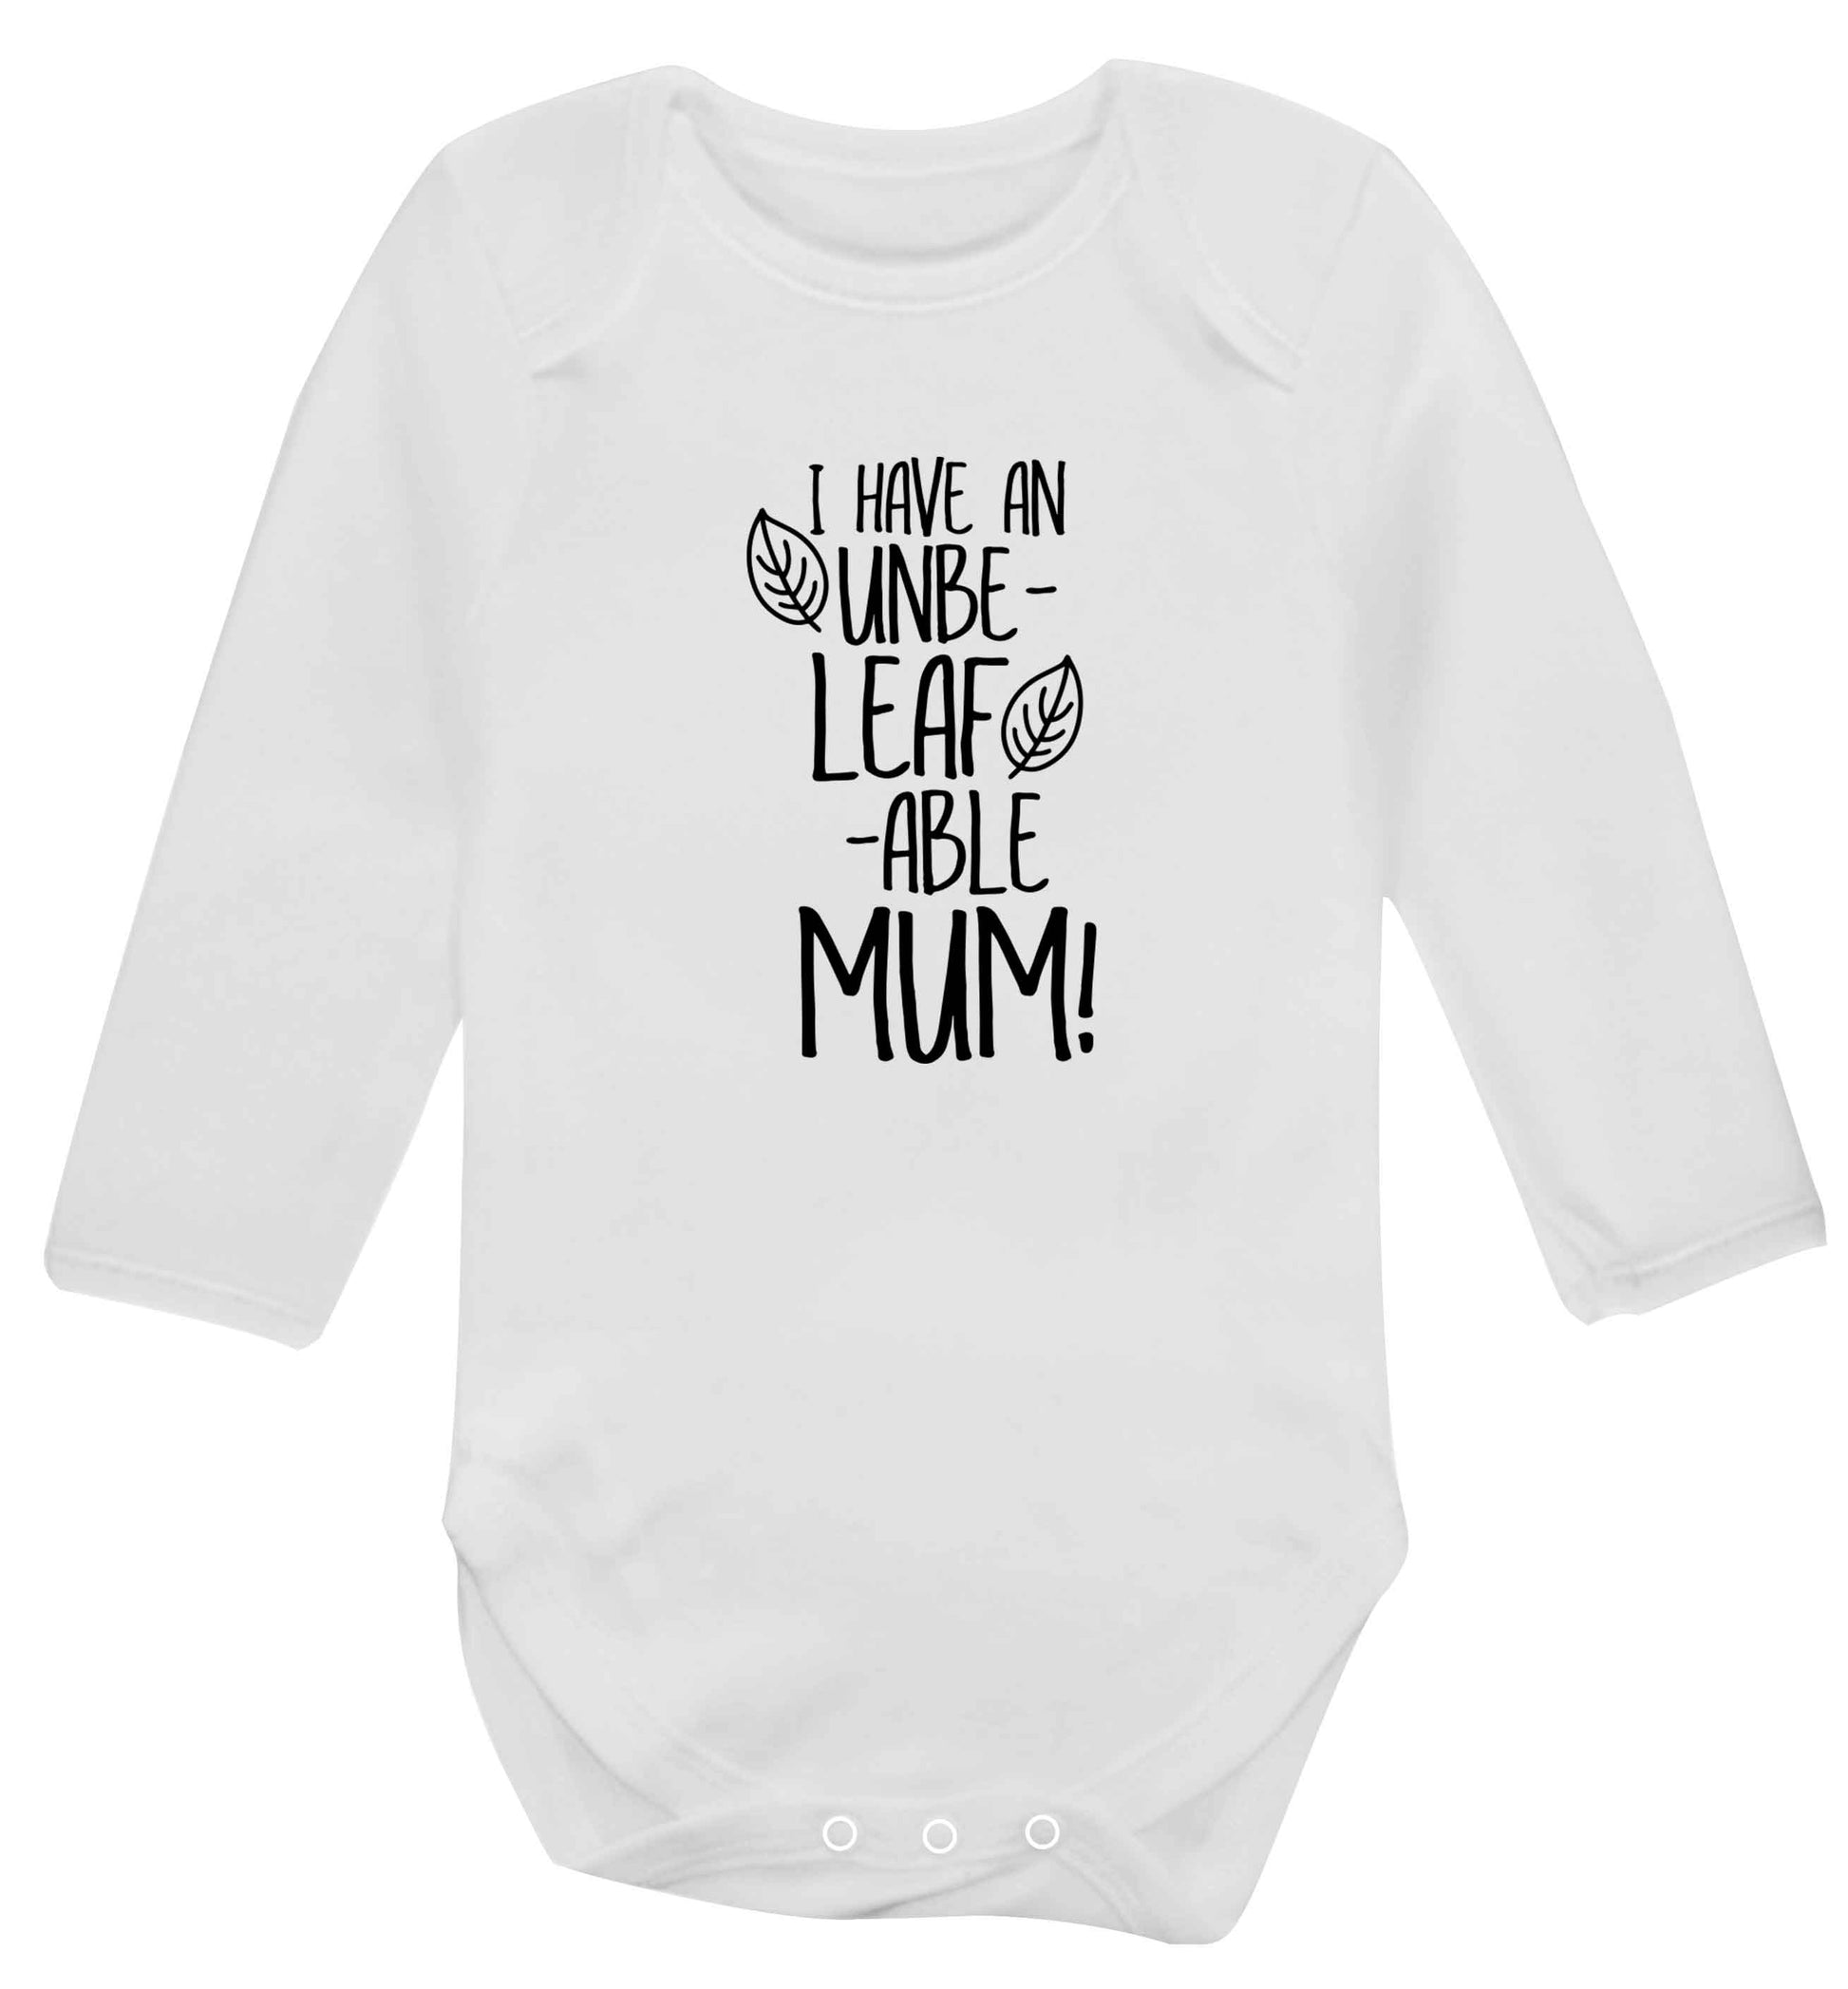 I have an unbeleafable mum! baby vest long sleeved white 6-12 months